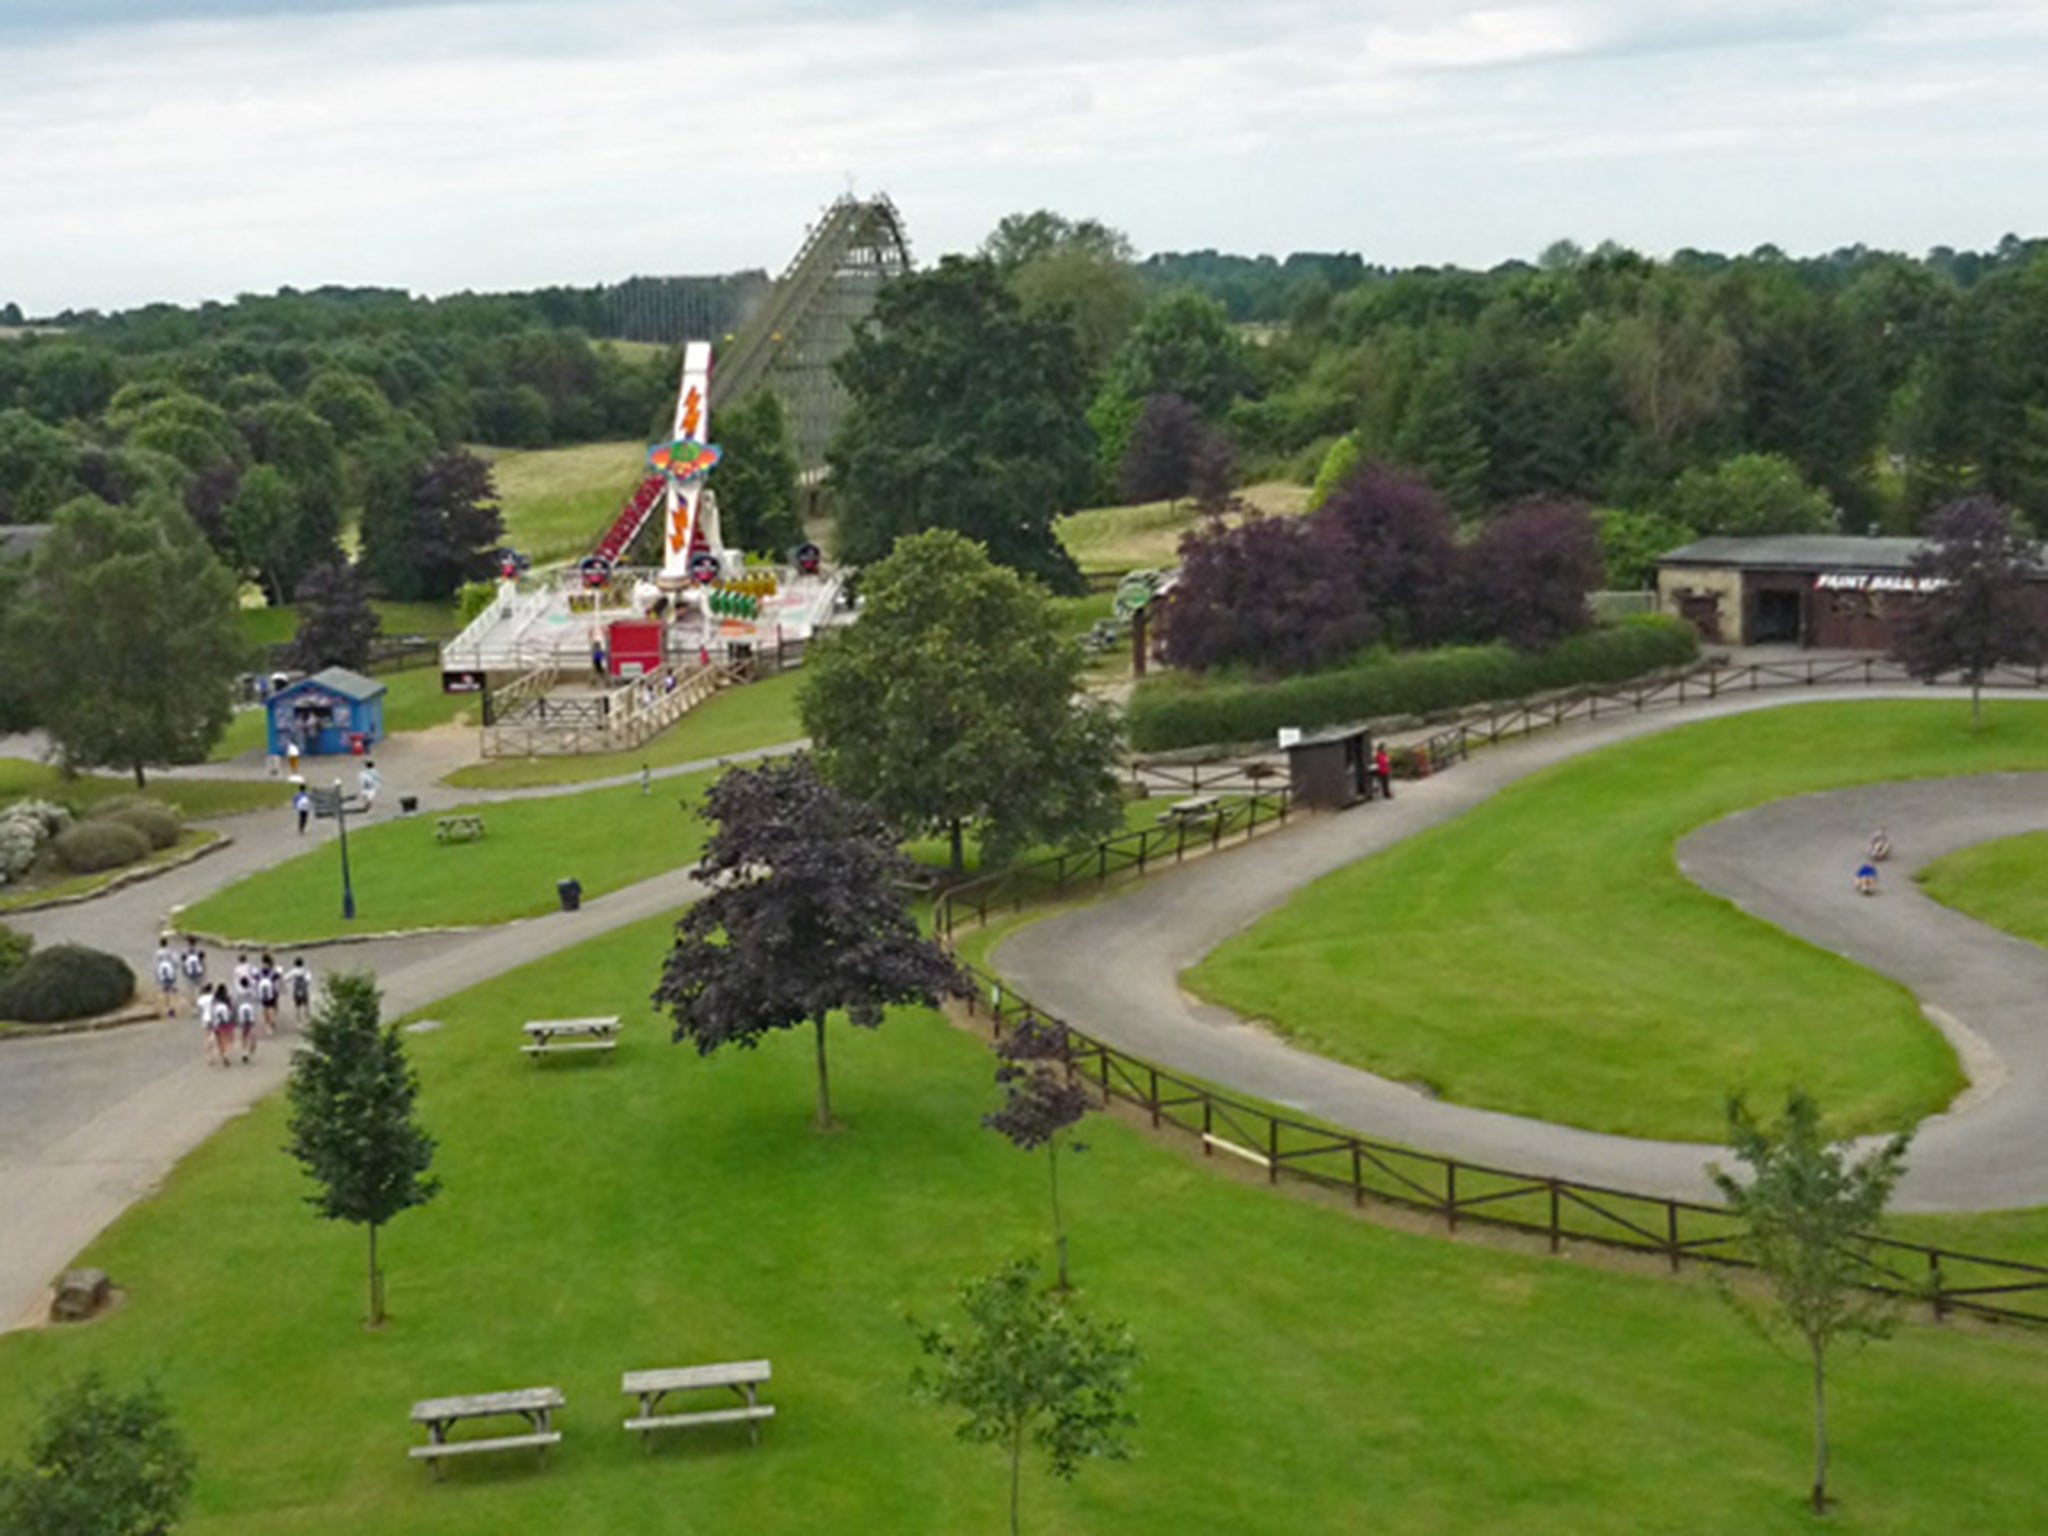 A deer was killed instantly after straying too close to the tracks of The Ultimate rollercoaster at Lightwater Valley